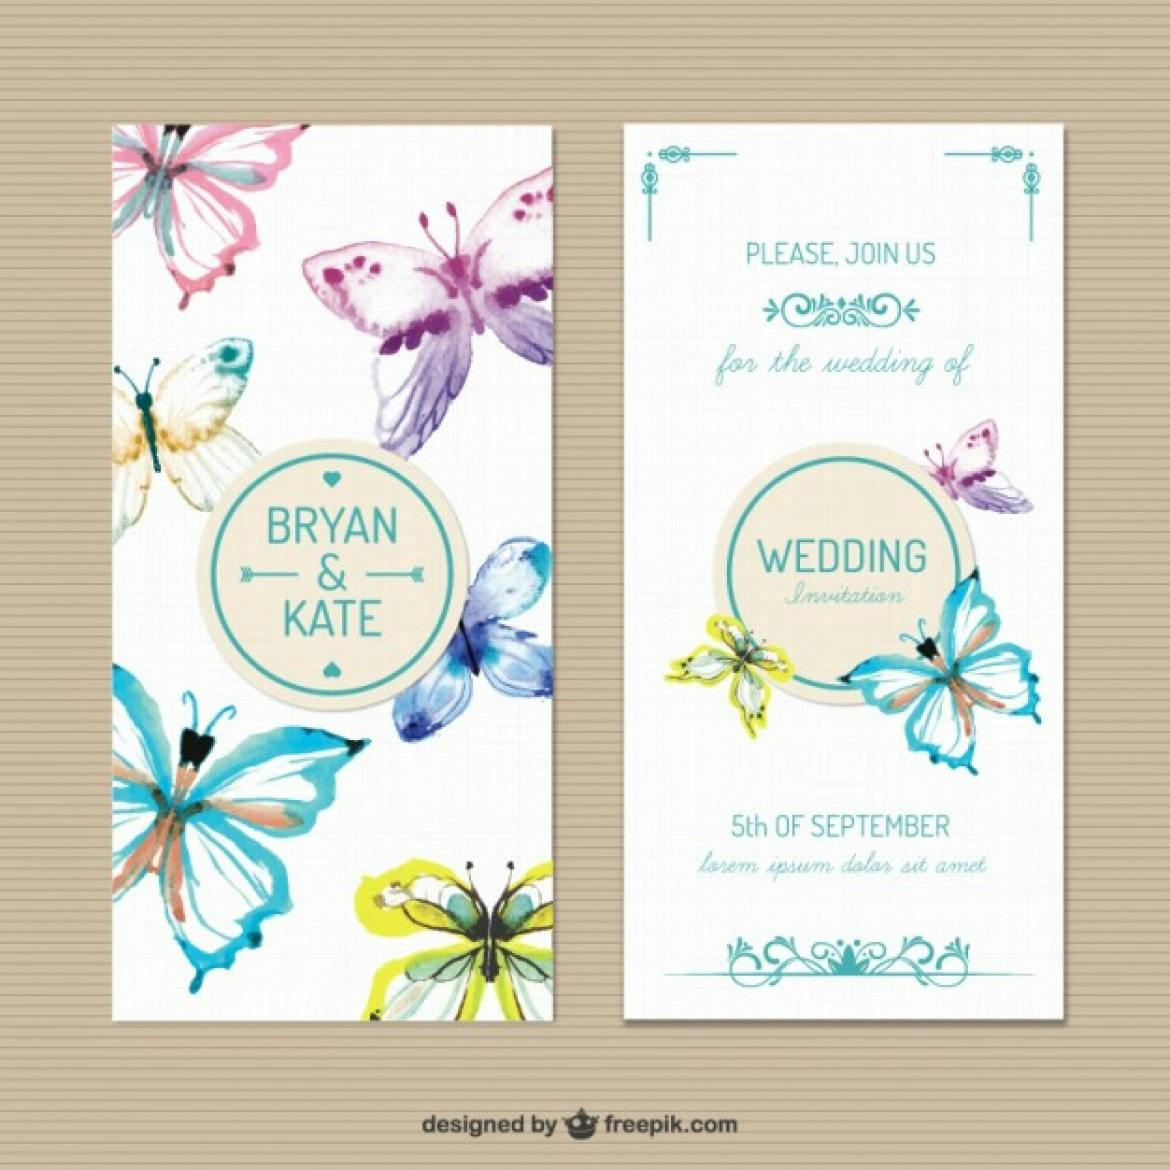 wpid-wedding-invitation-with-hand-painted-butterflies_23-2147515810-1170x1170